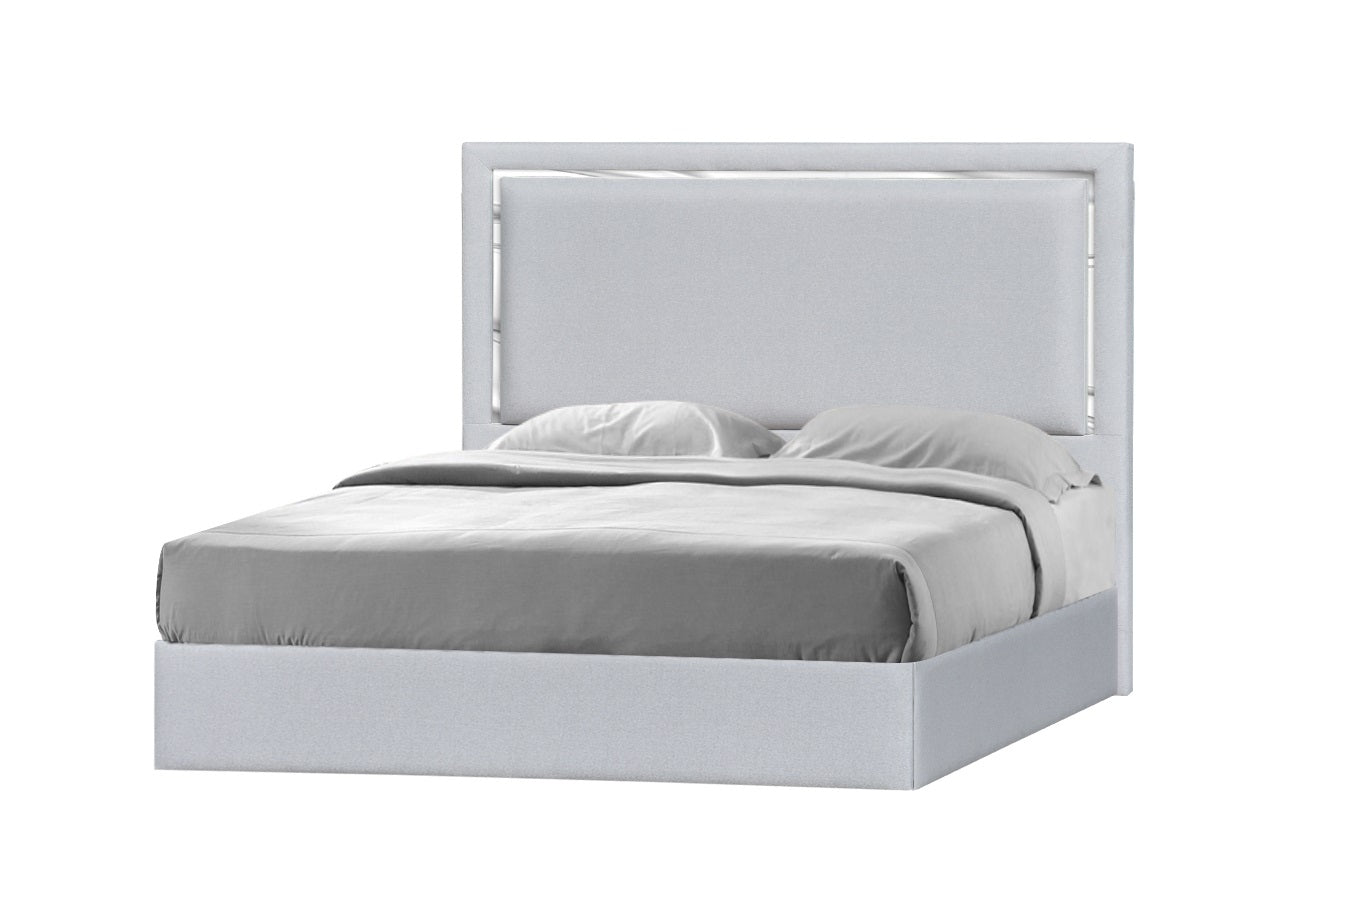 Monet King Bed Silver Grey by JM